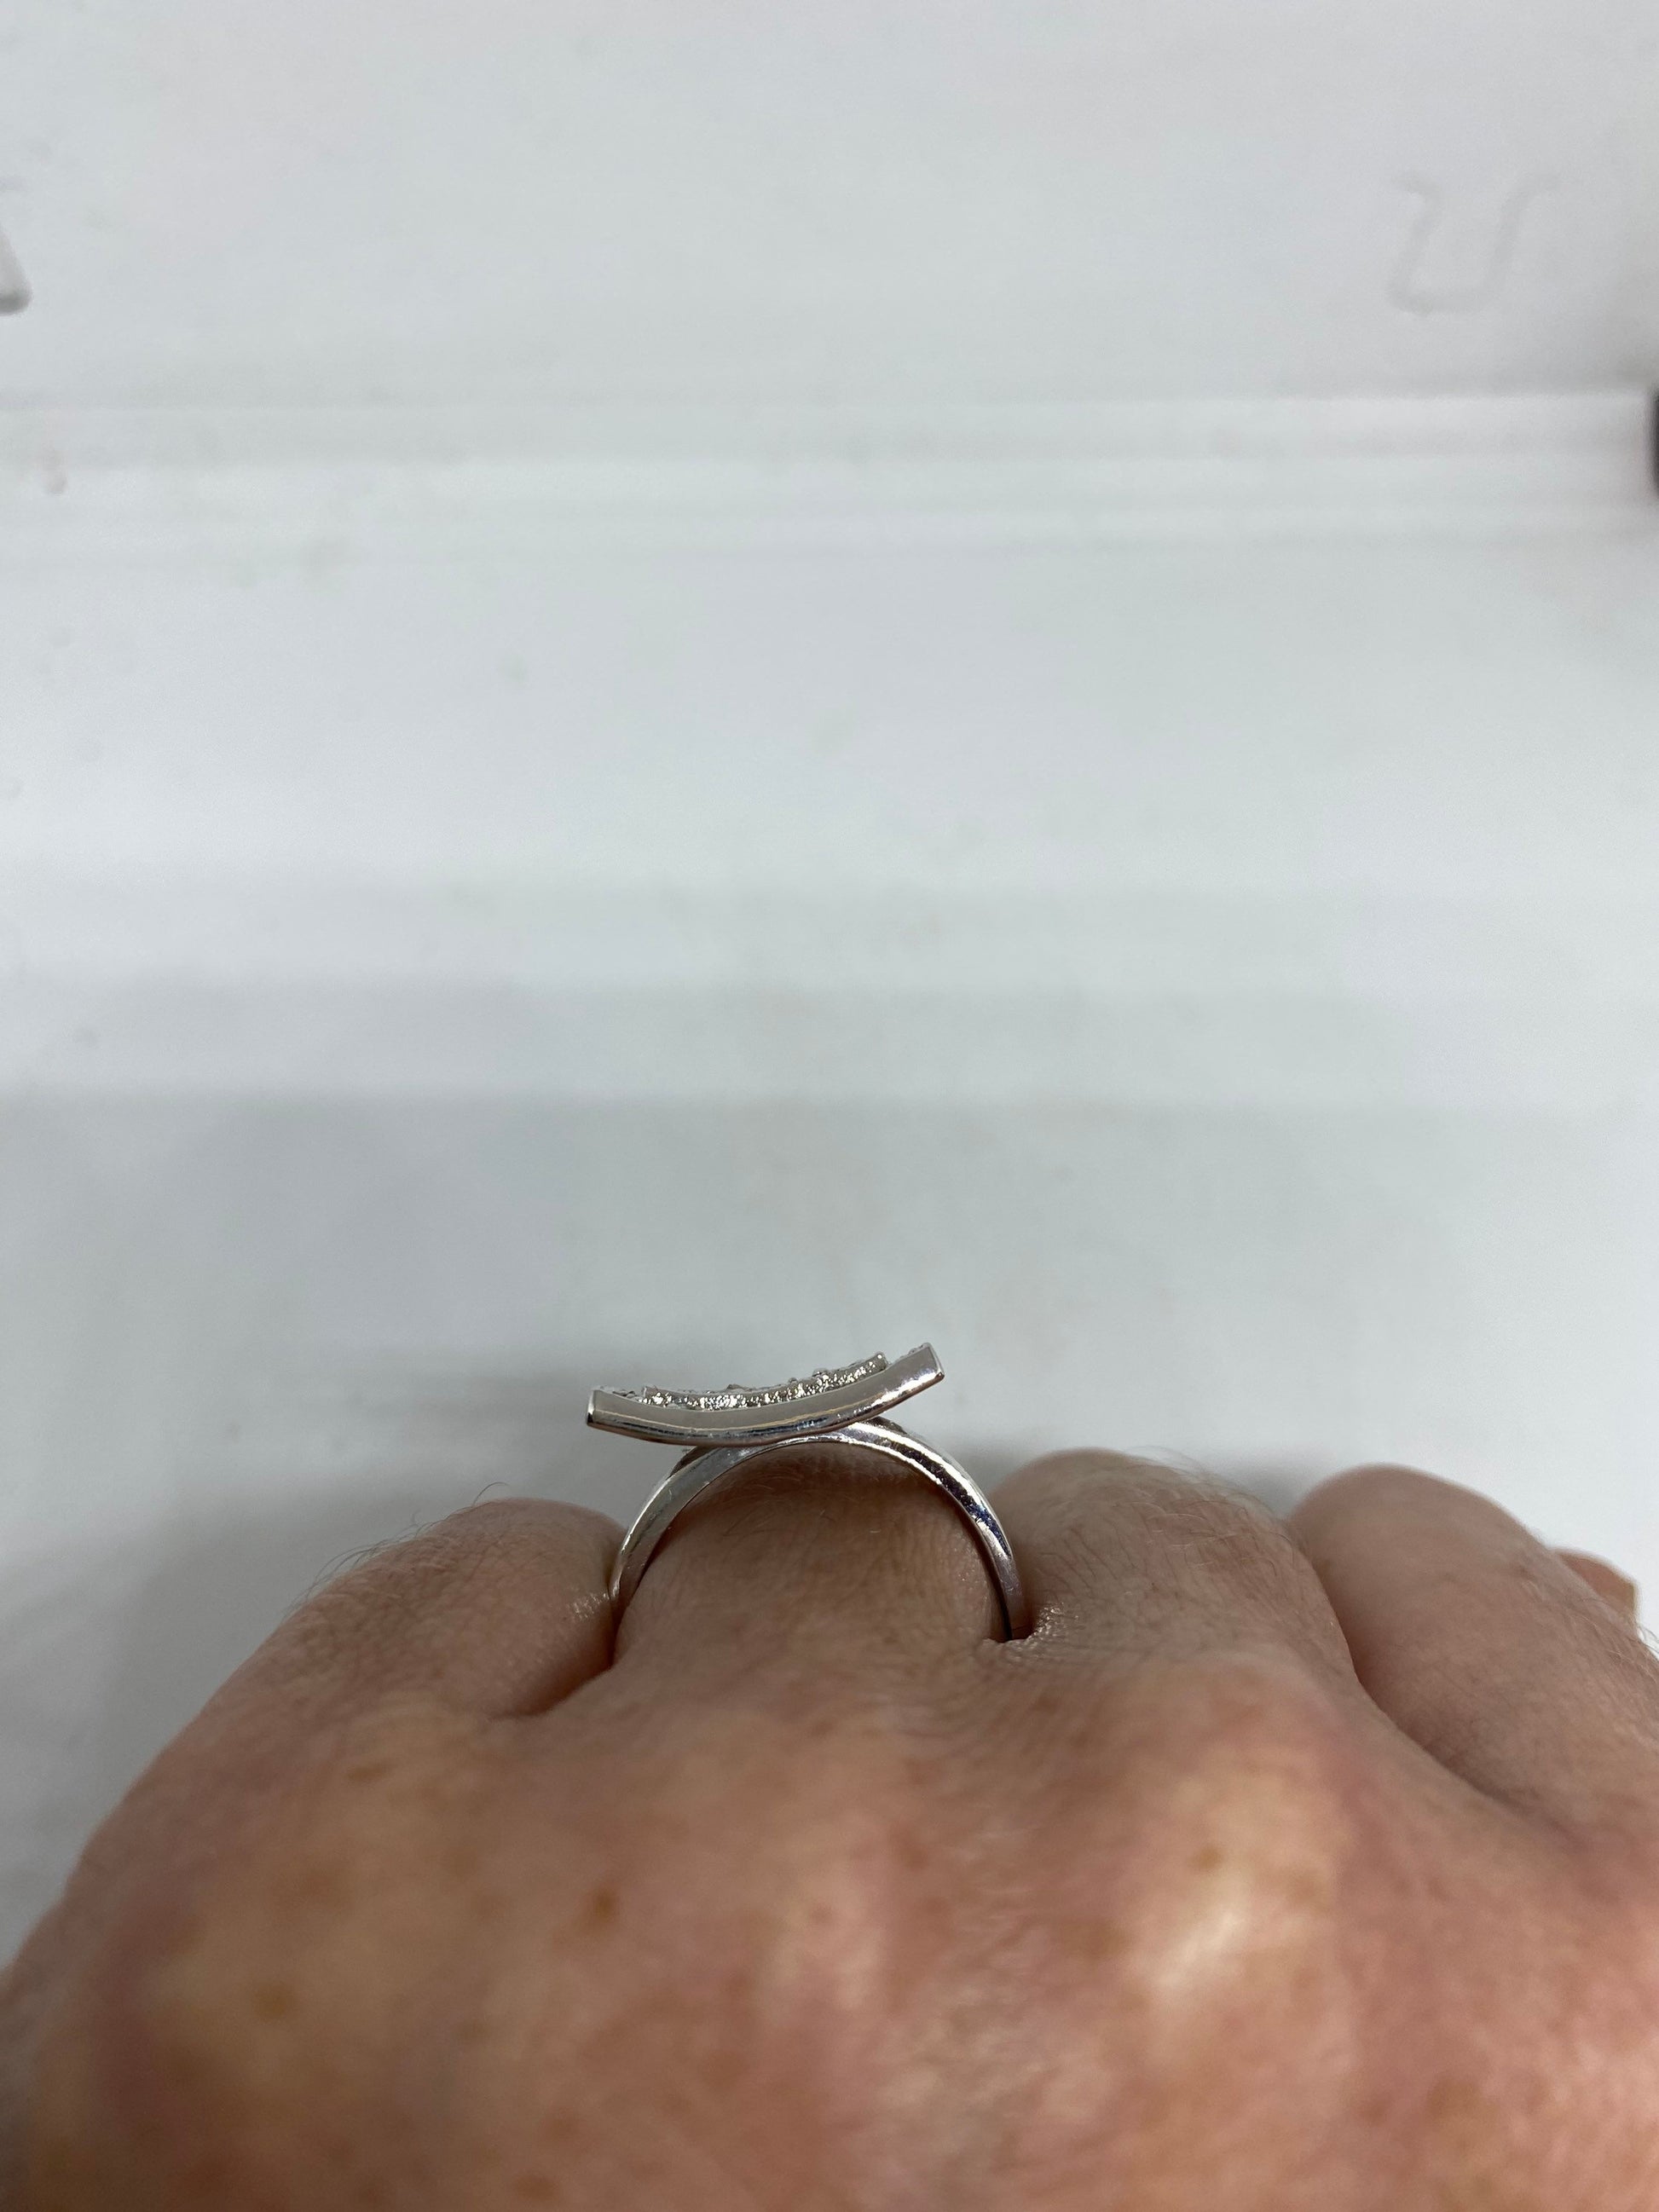 Vintage Clear White Sapphire 925 Sterling Silver Cocktail Ring